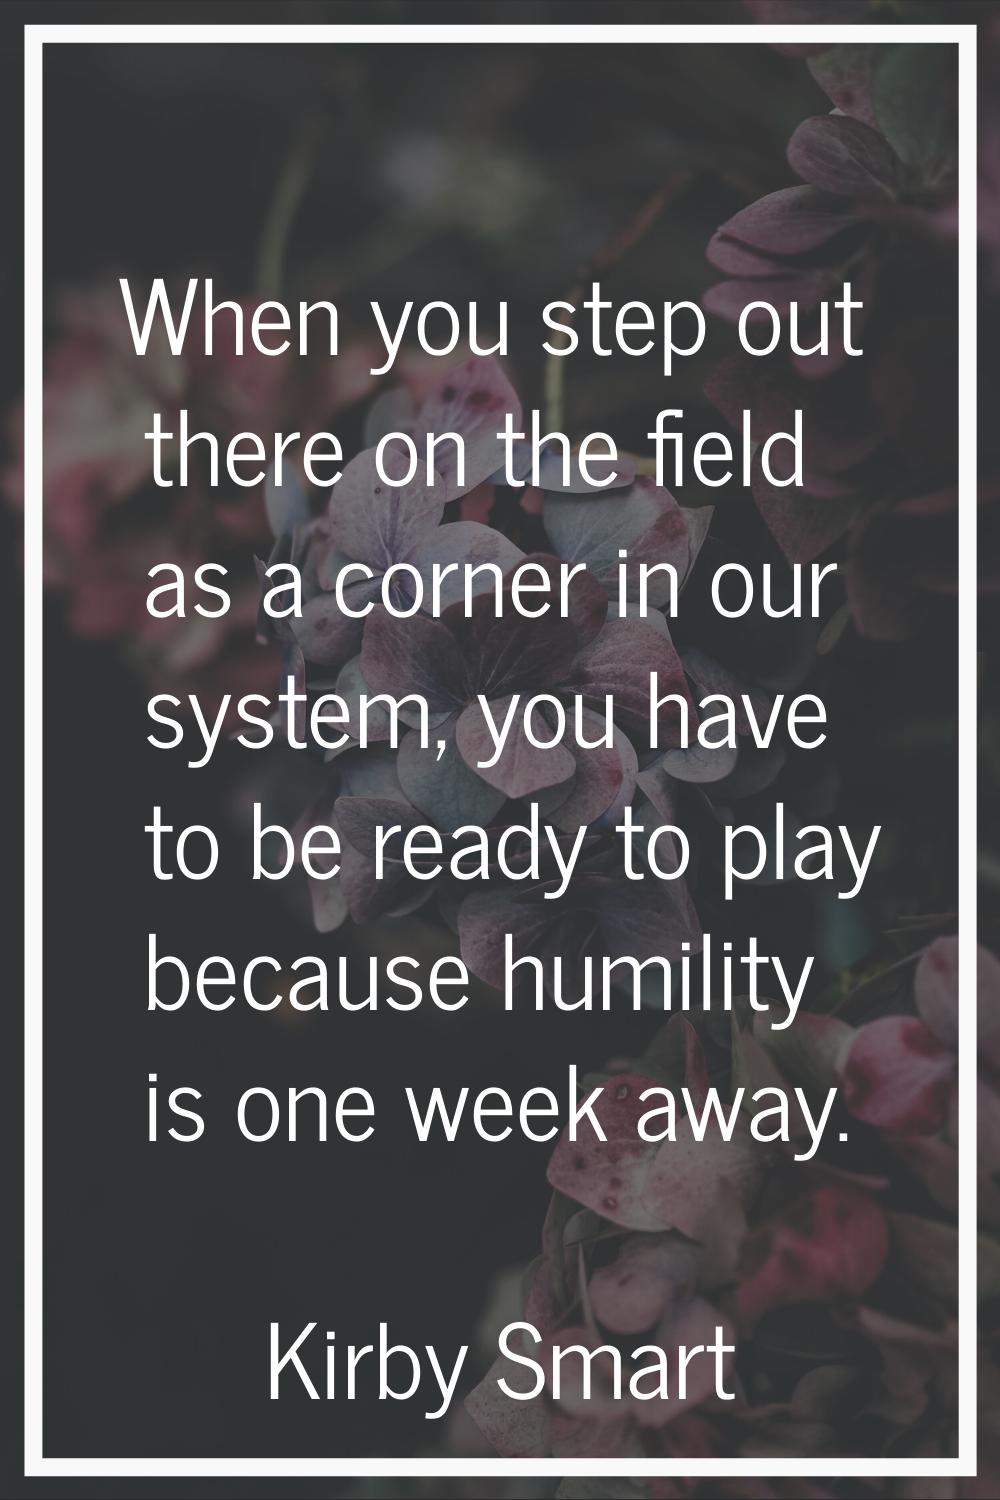 When you step out there on the field as a corner in our system, you have to be ready to play becaus